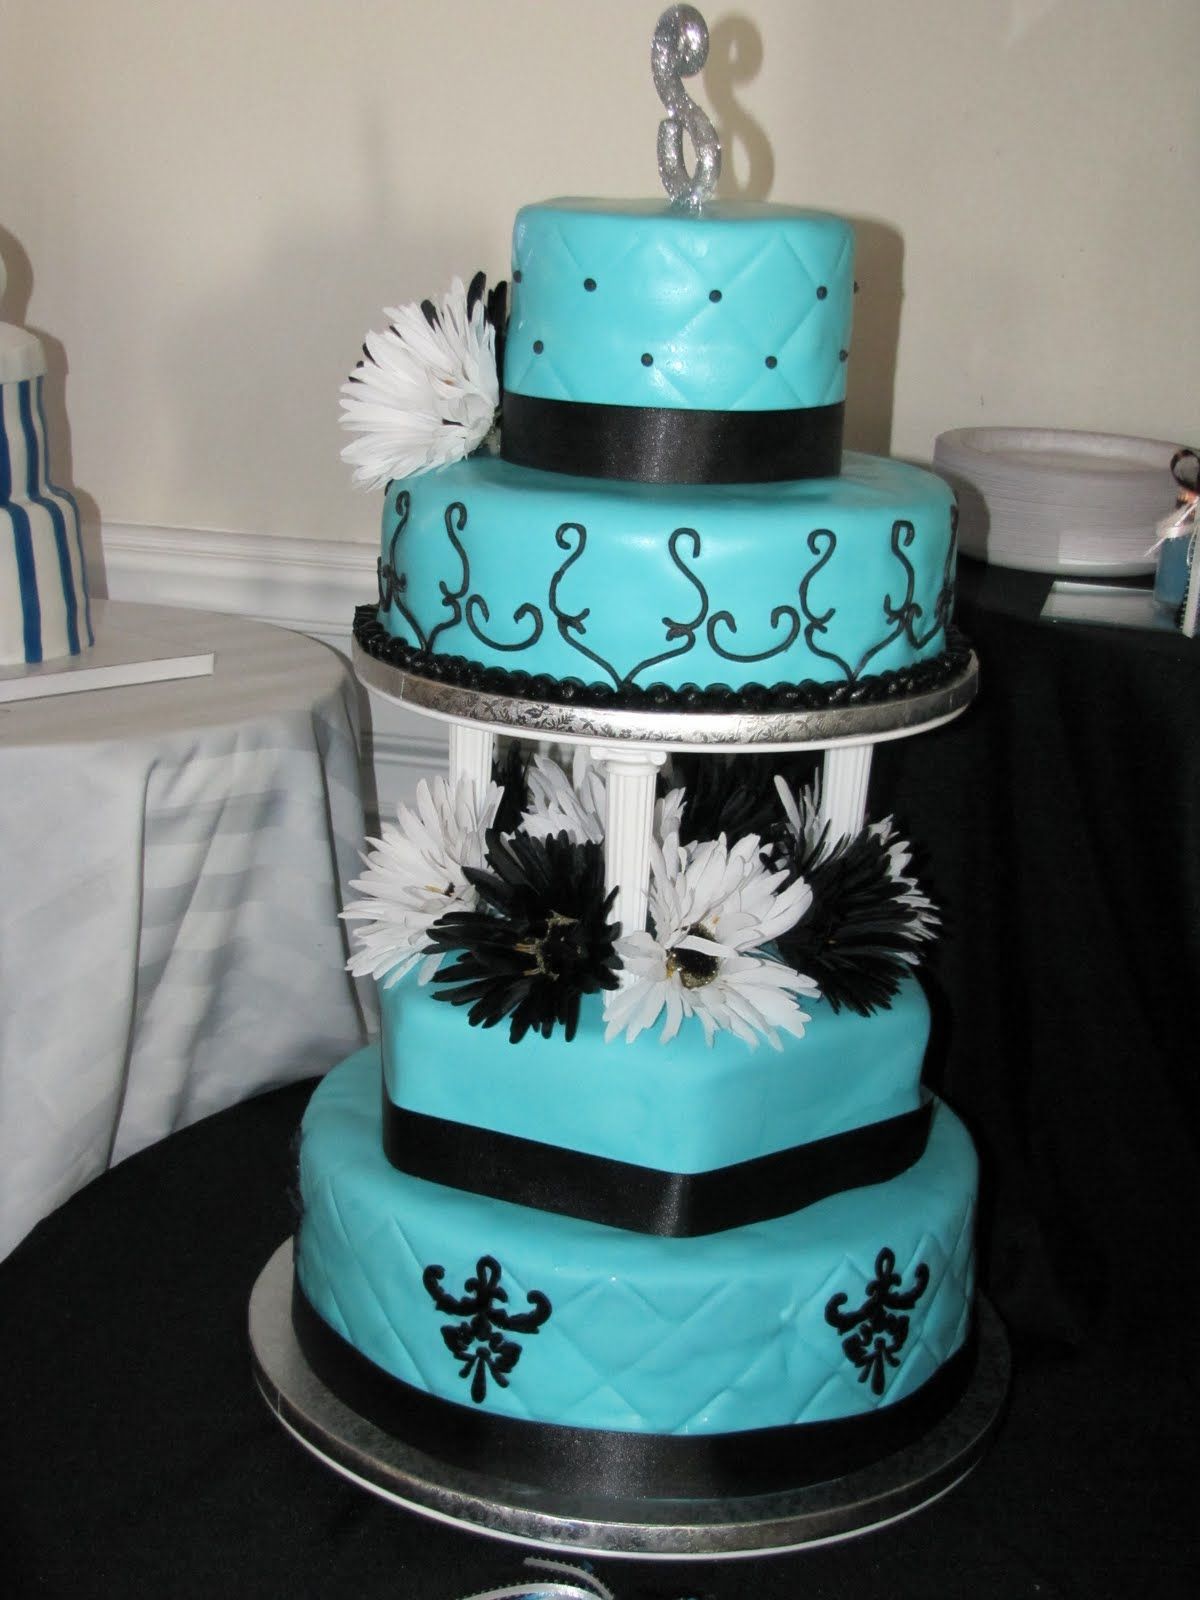 Want a blue and black wedding! Perfect cake for that